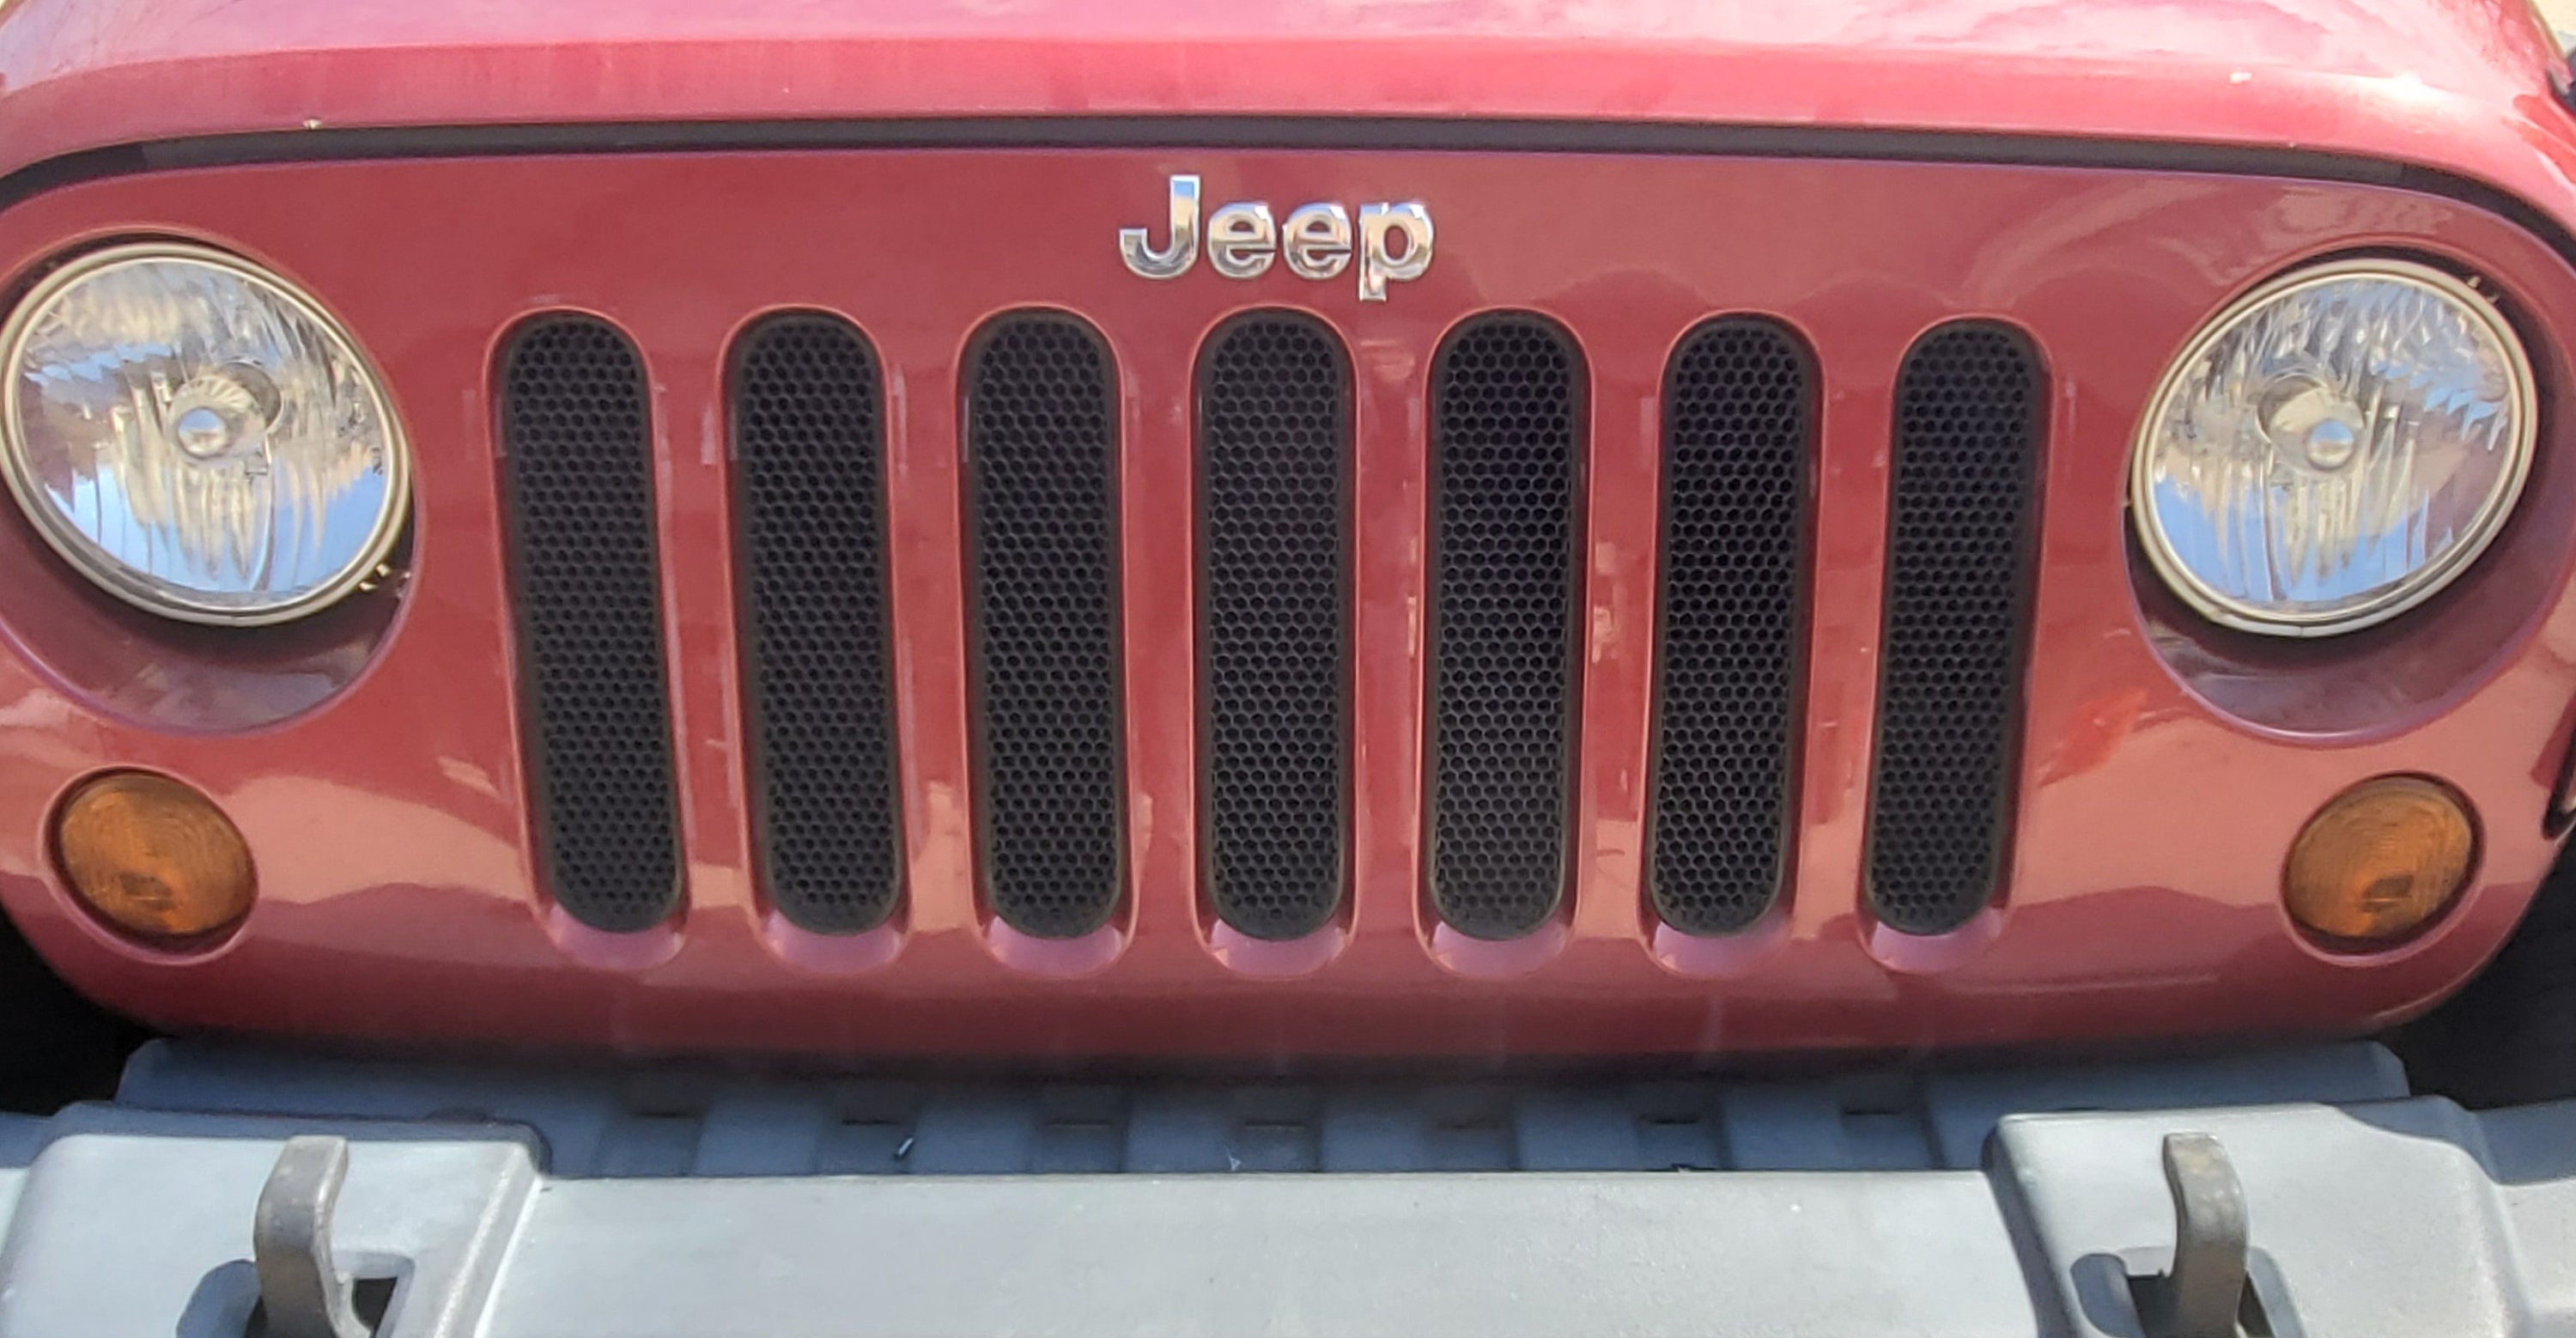 Solid Black Grill Inserts for the Jeep Wrangler JK - Etsy